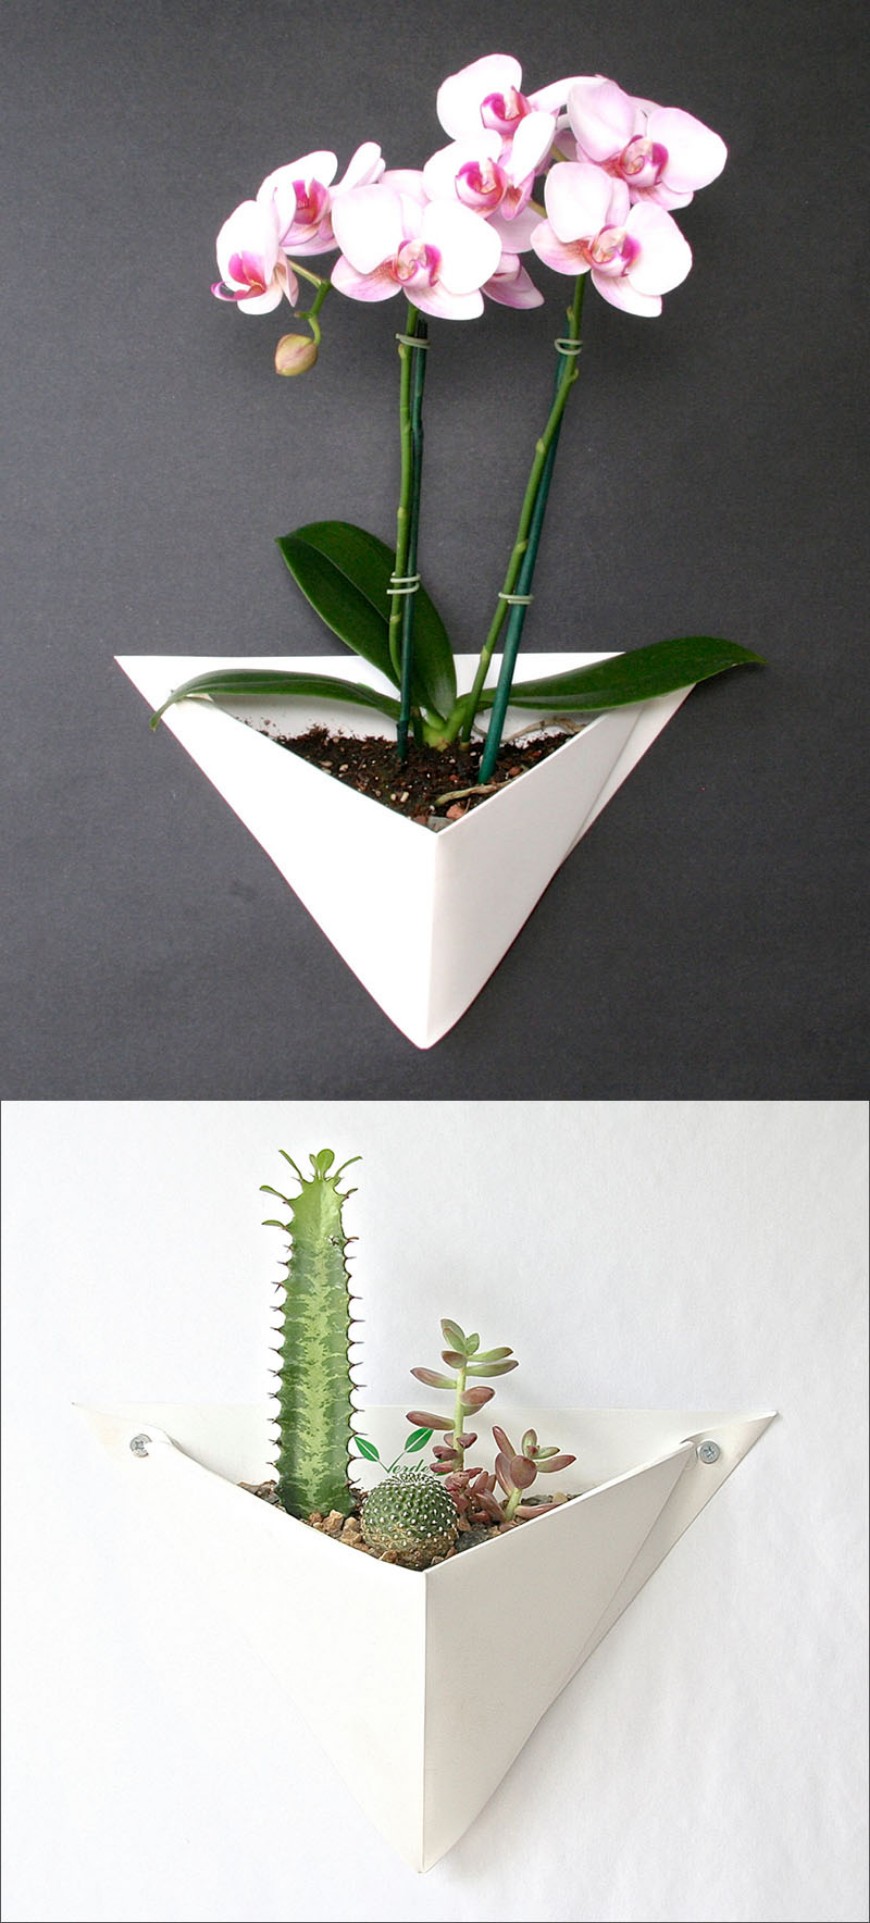 10 Modern Wall Mounted Plant Holders To Decorate Bare Walls (2)